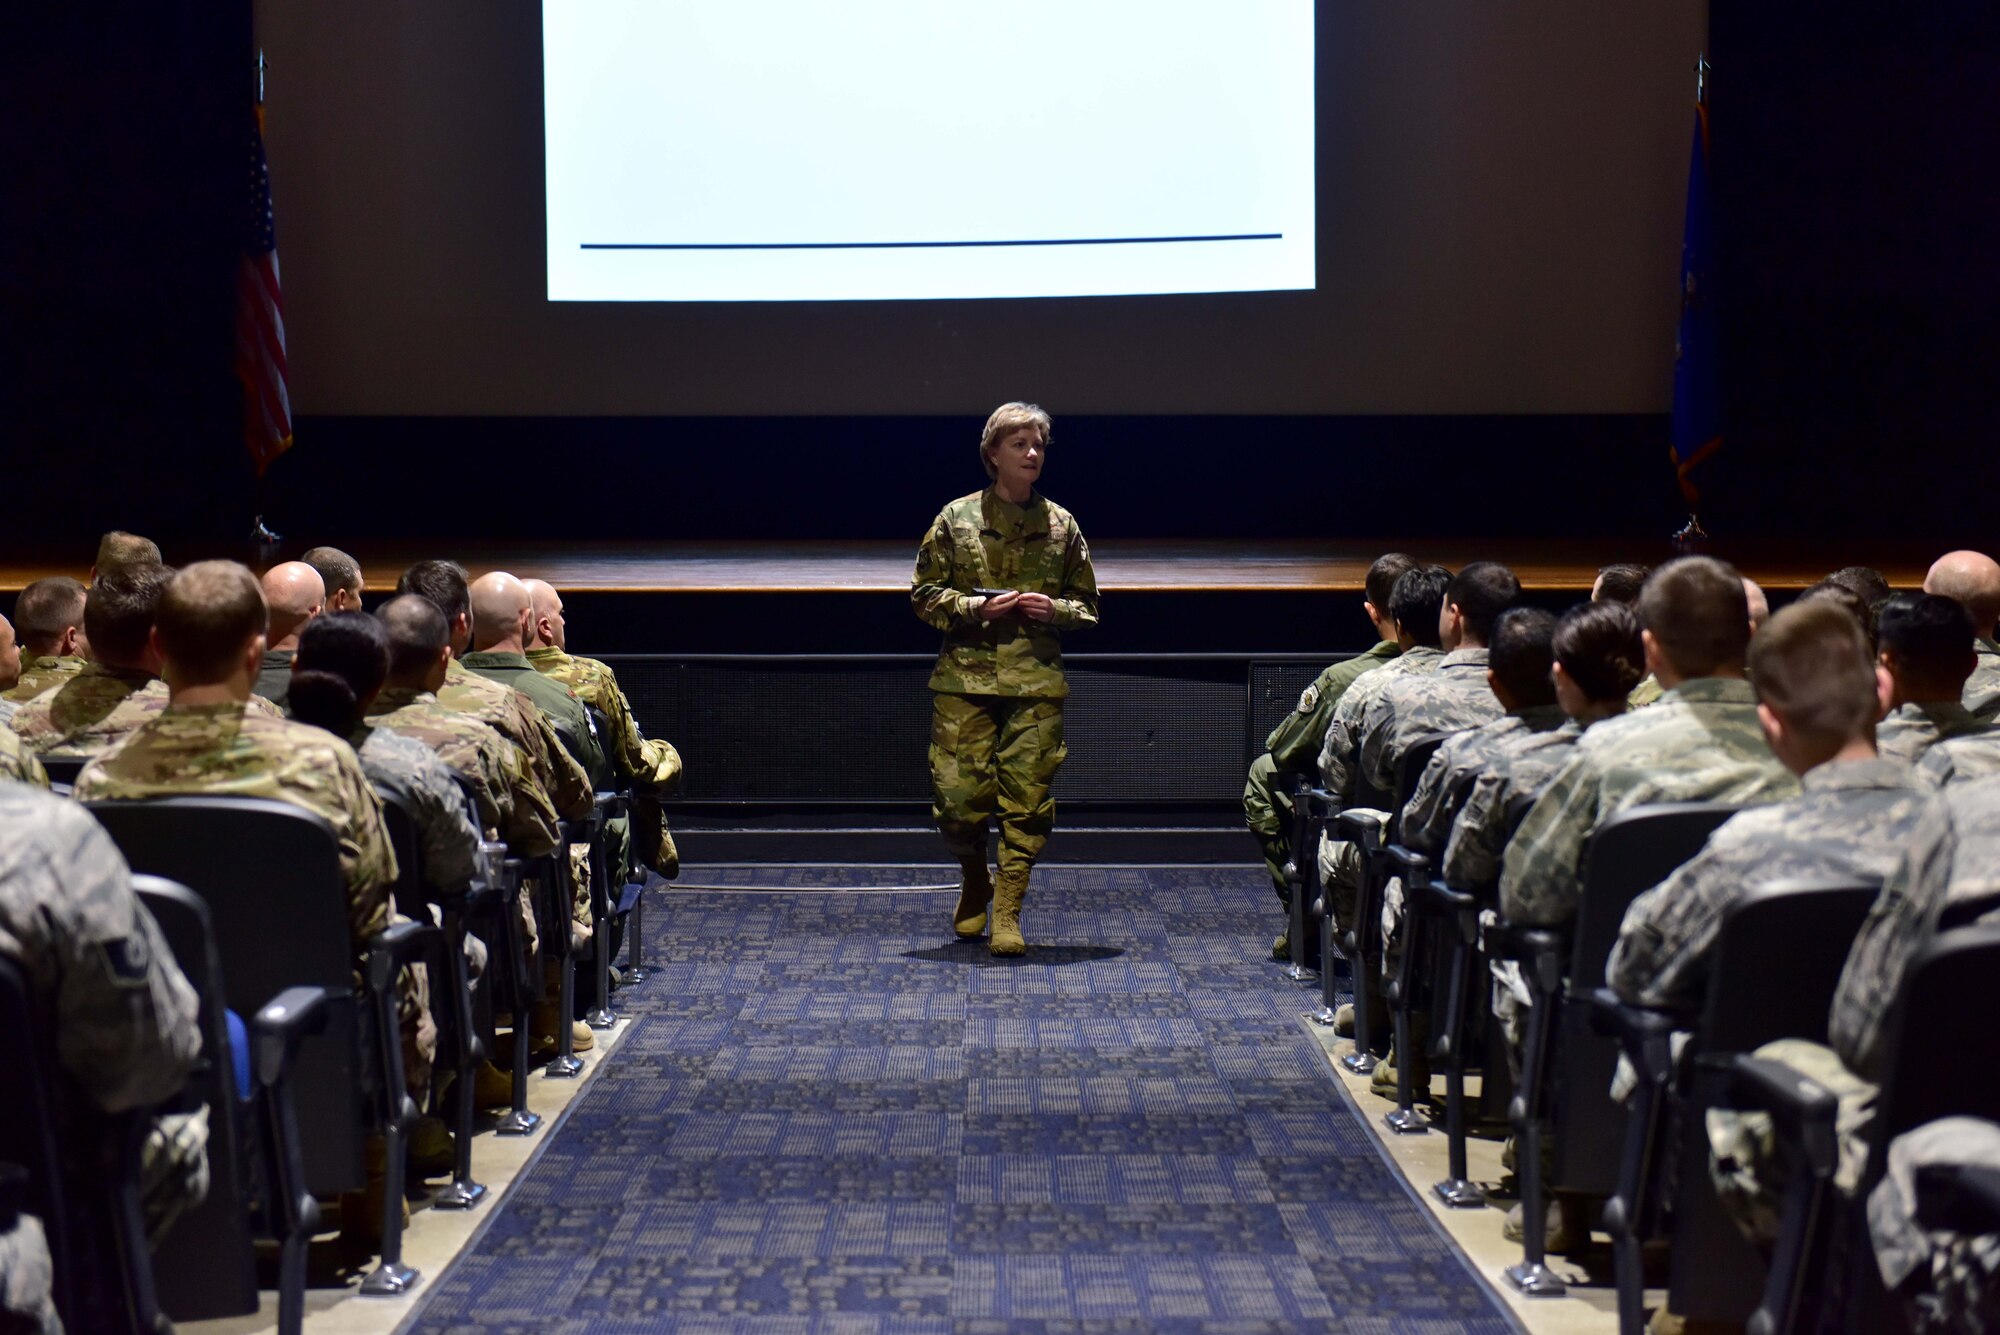 A woman wearing the operational camouflage pattern uniform speaks to a room full of Airmen.